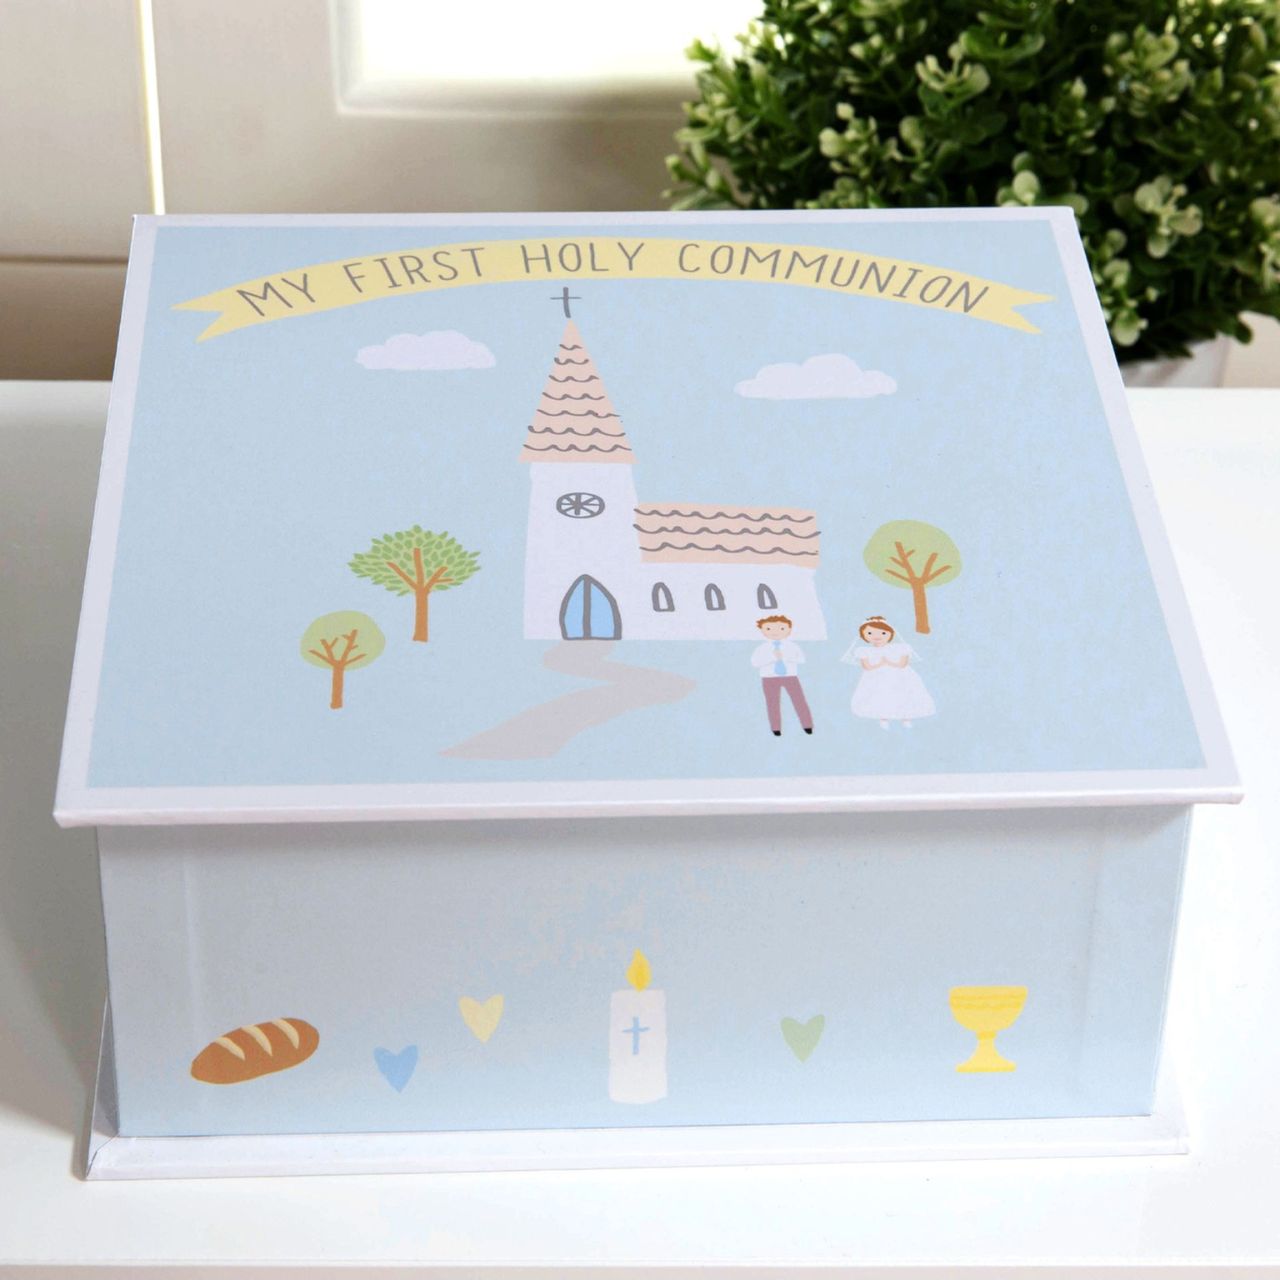 Preserve precious memories, moments and trinkets from his FIRST HOLY COMMUNION with this adorable pink keepsake box.